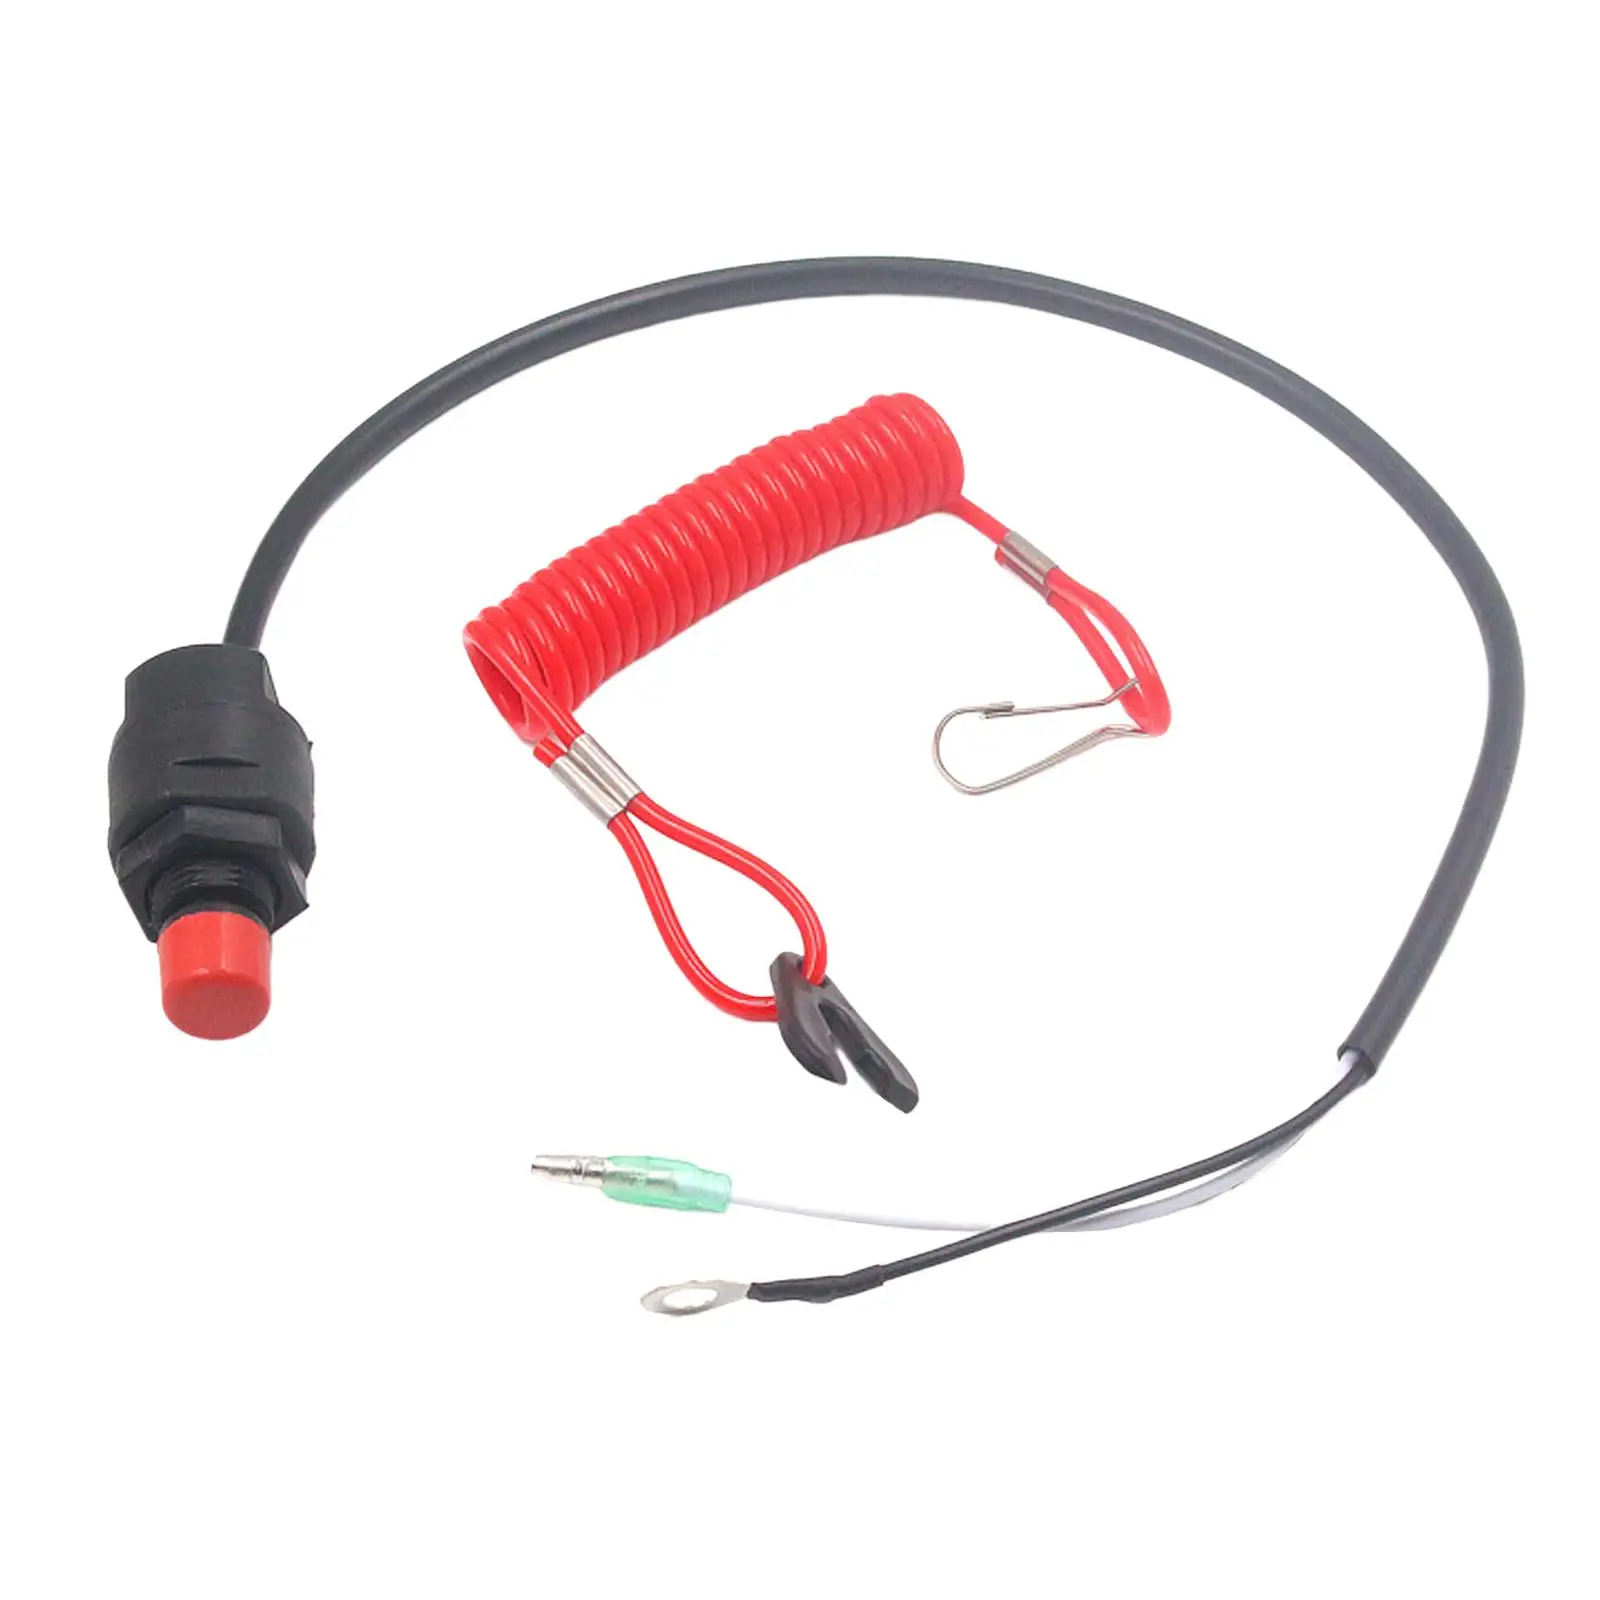 Waterproof On Off Kill Switch Safety Lanyard Flexible Engine Motor Emergency Kill Stop Switch for Boat Outboard Accessory